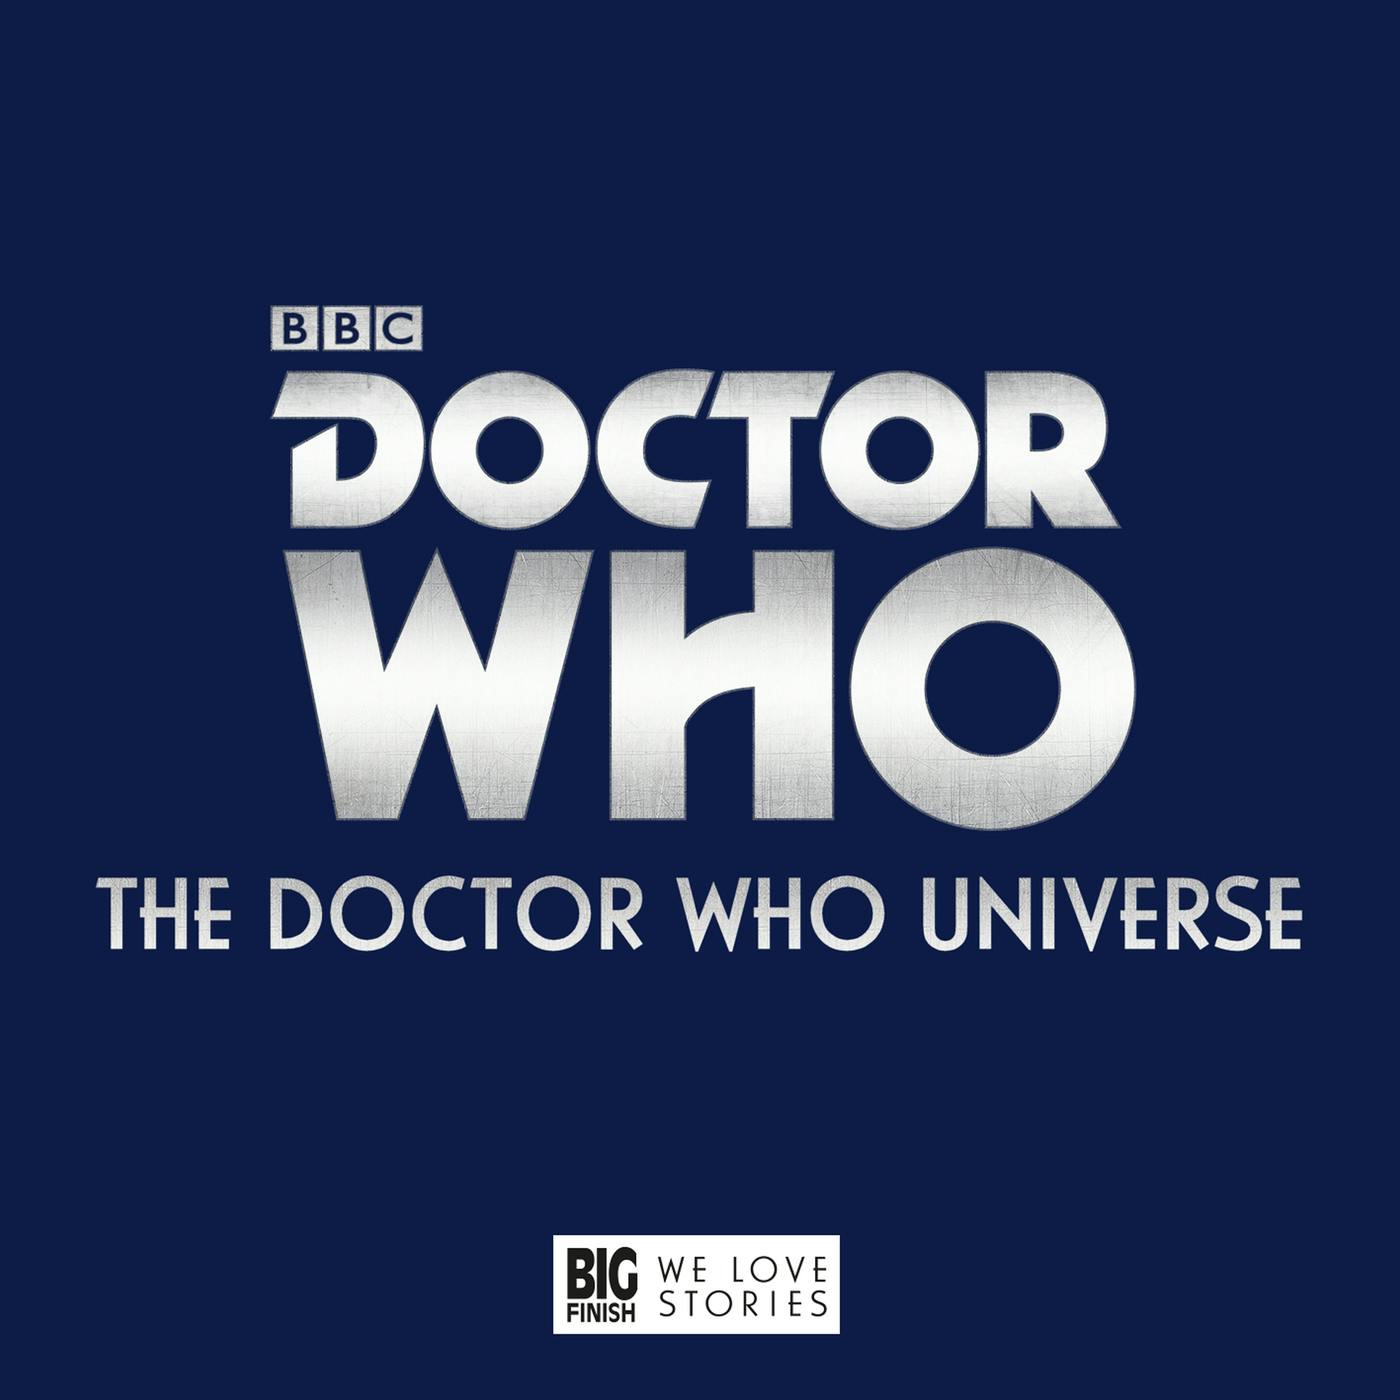 Guidance for the Doctor Audio Drama Playlist, Full Length Doctor Who Episodes - Here's How It Works! (Unabridged) - undefined